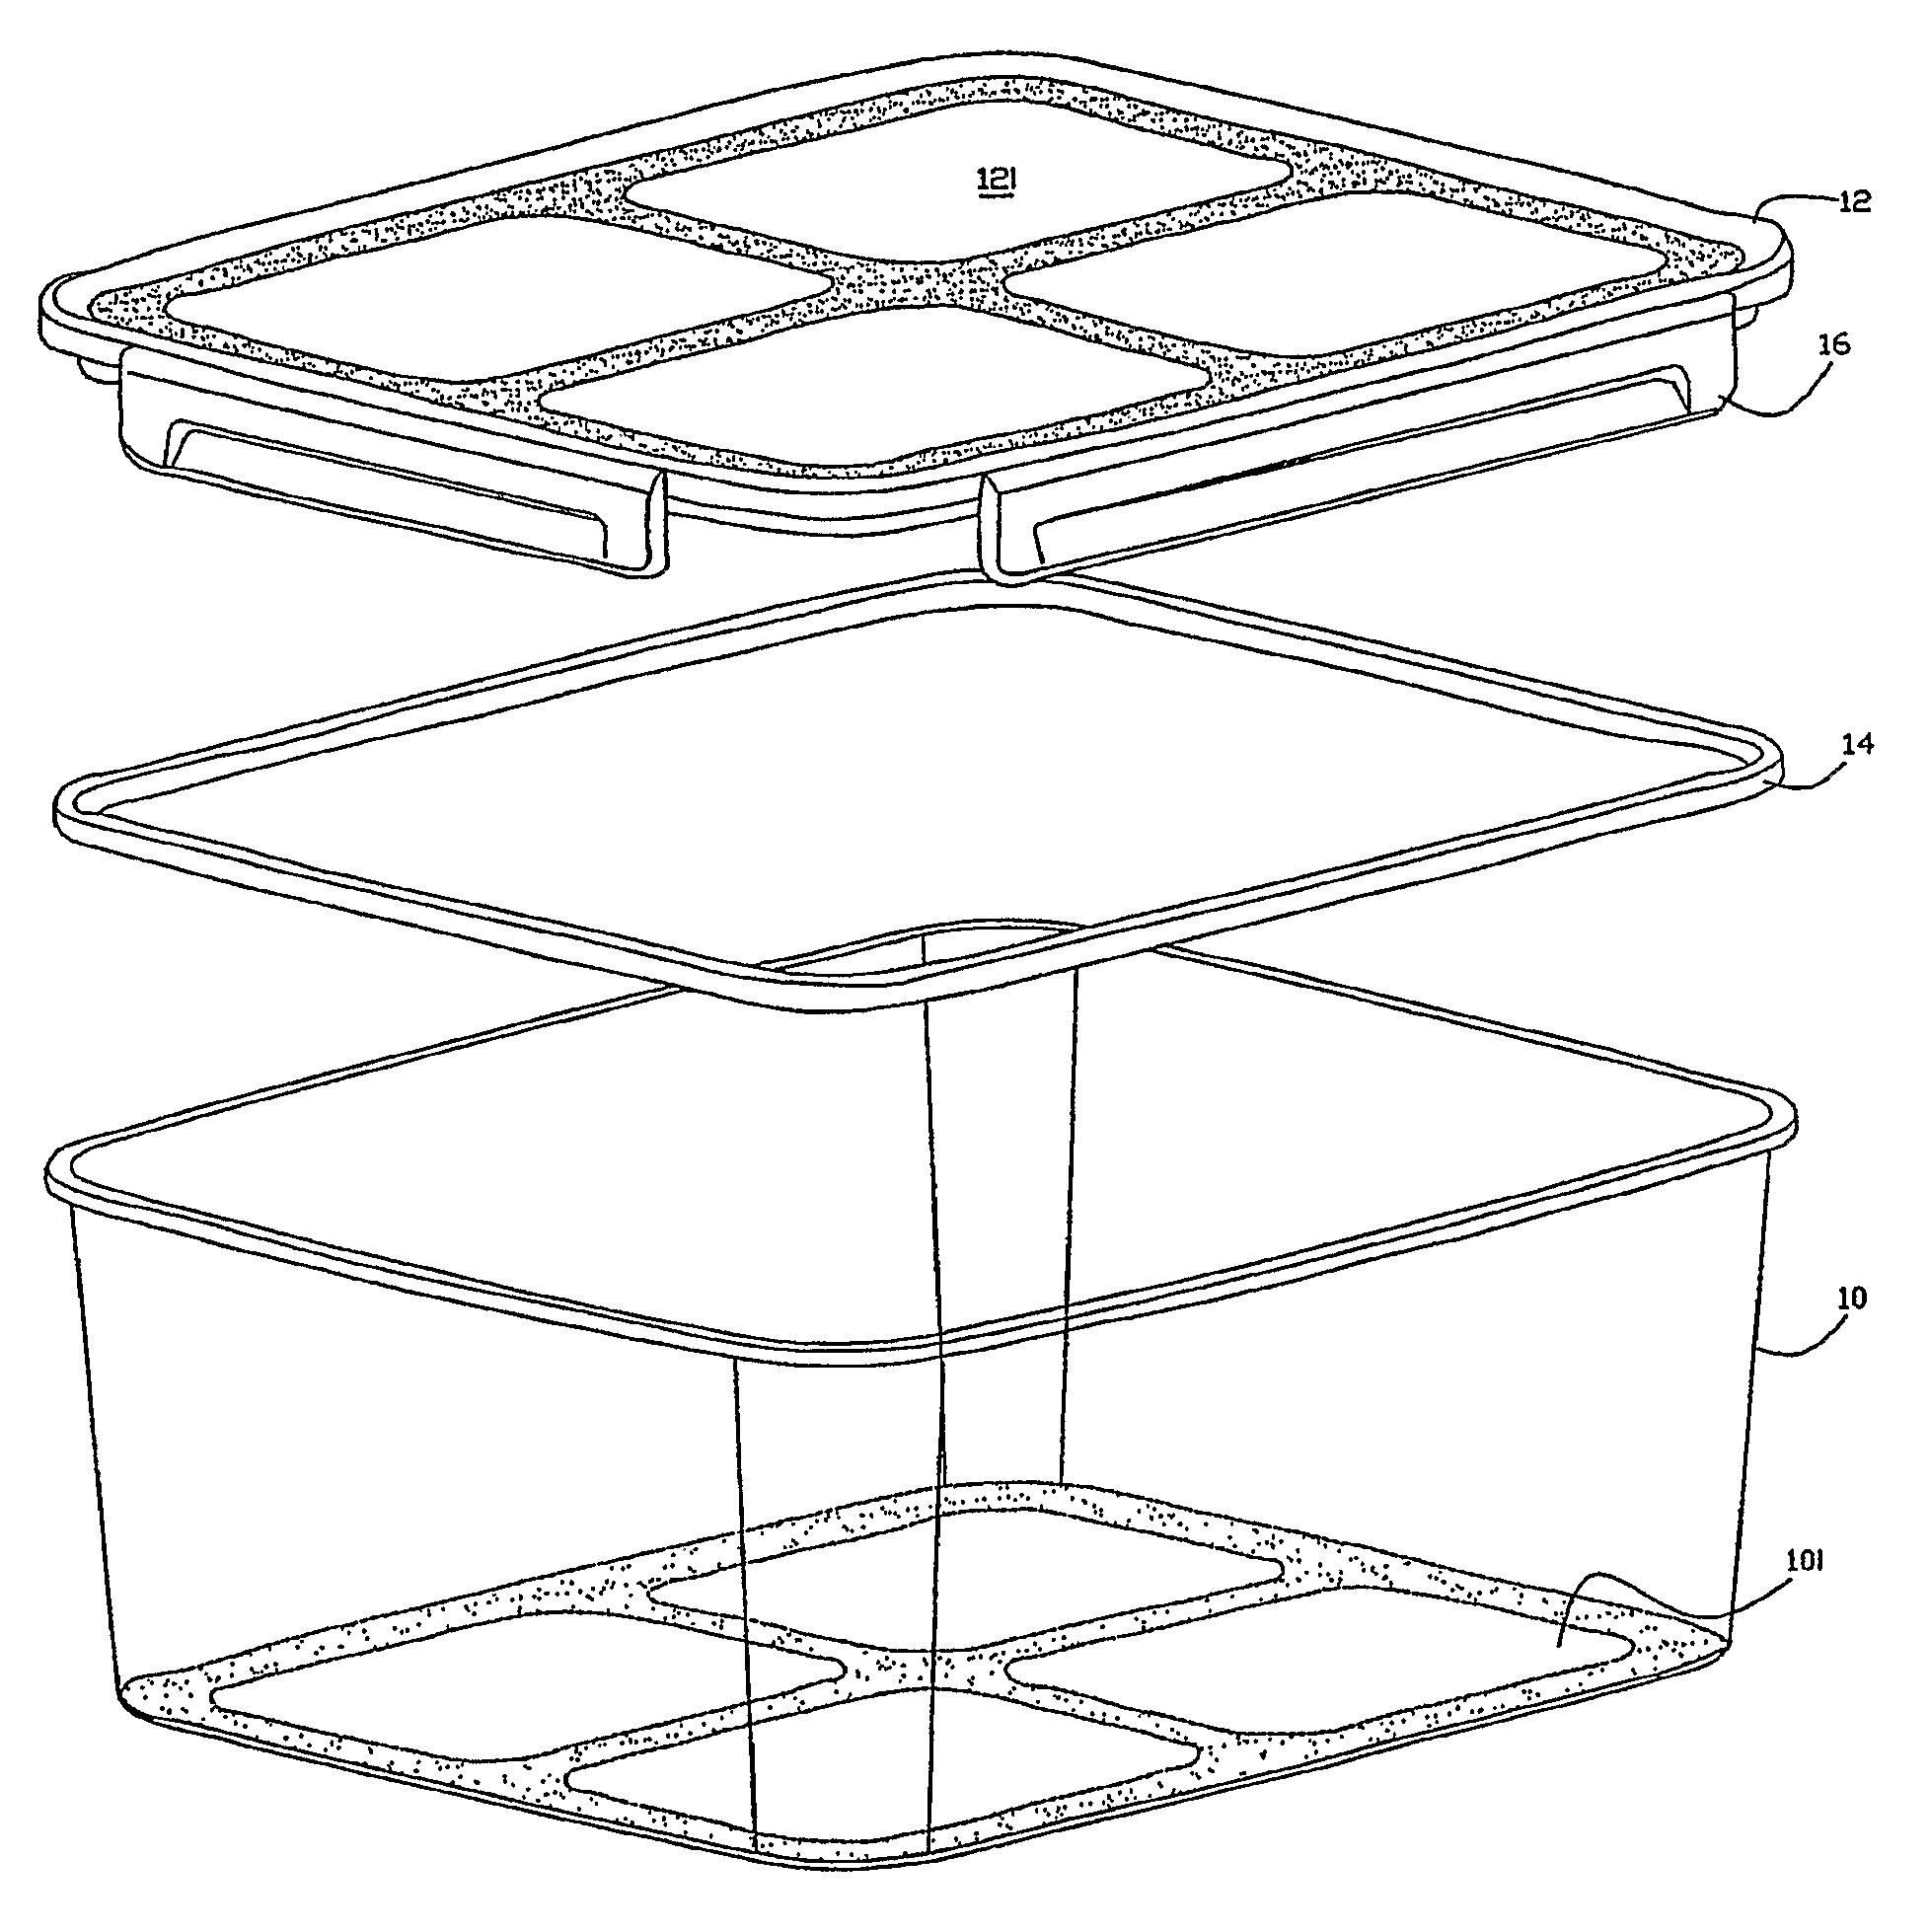 System for aiding the visual matching of containers having diverse openings with corresponding lids